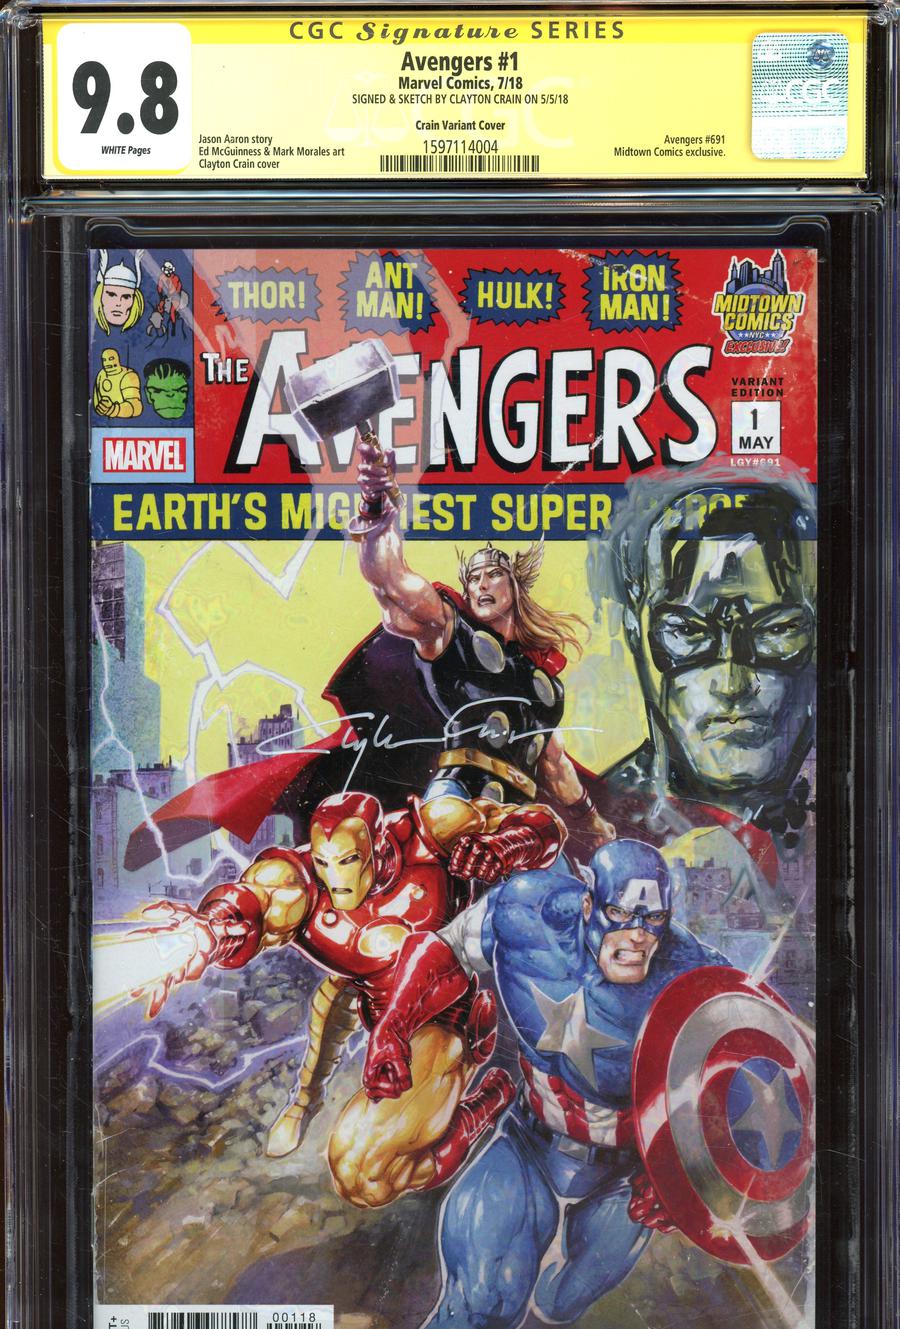 Avengers Vol 7 #1  Midtown Exclusive Clayton Crain Variant Cover Signed And Captain America Sketch By Clayton Crain CGC 9.8